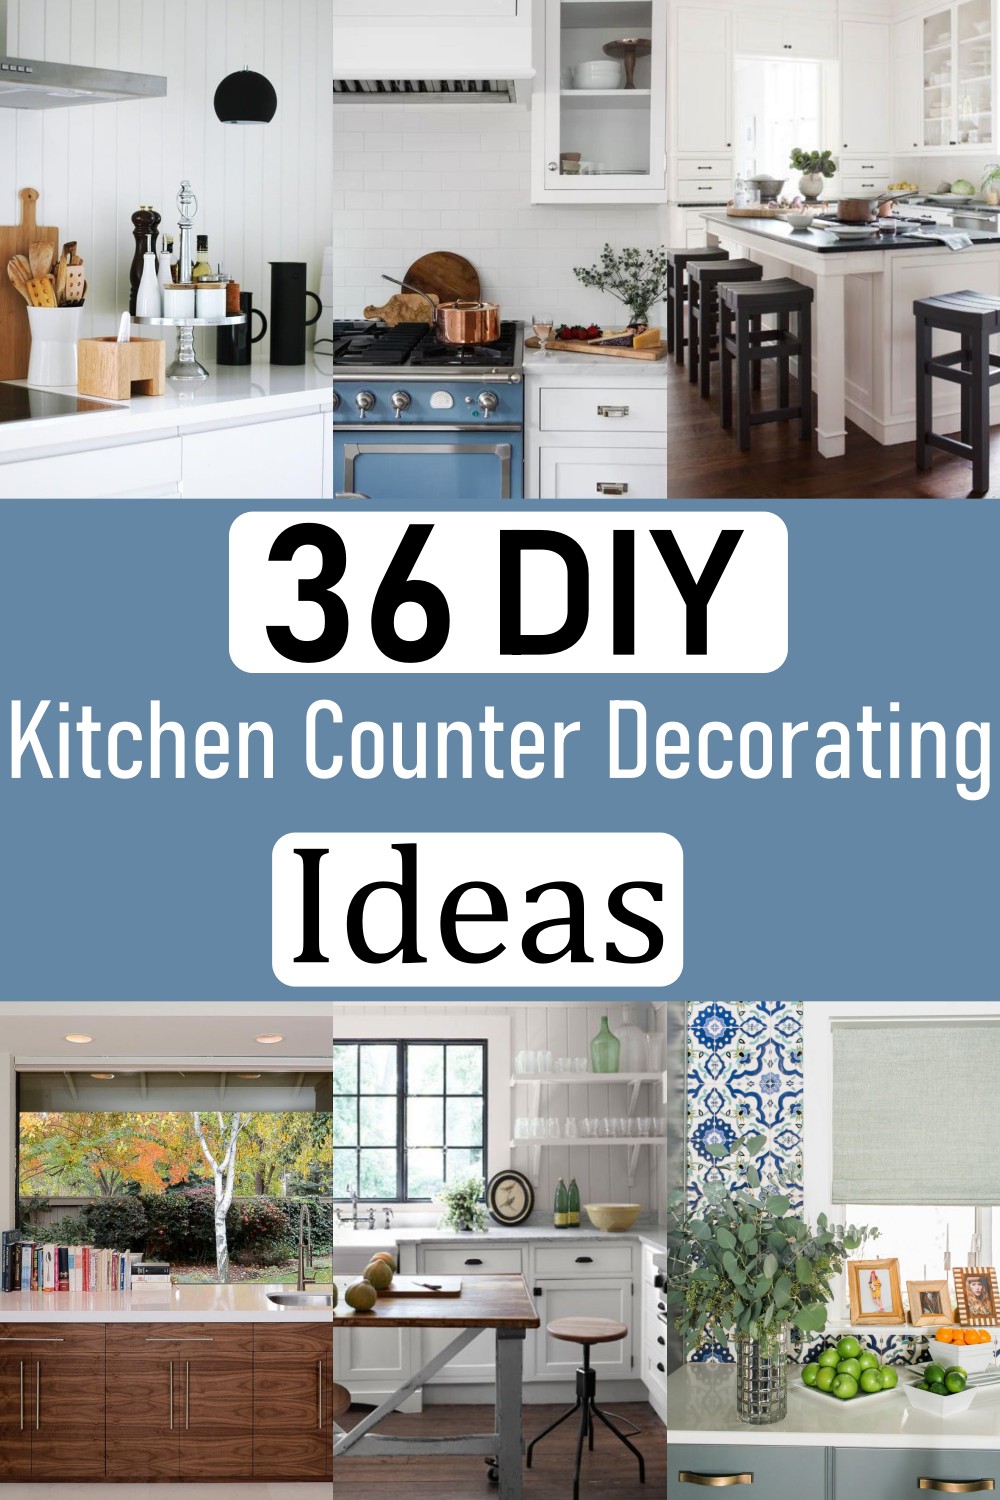 Kitchen Counter Decorating